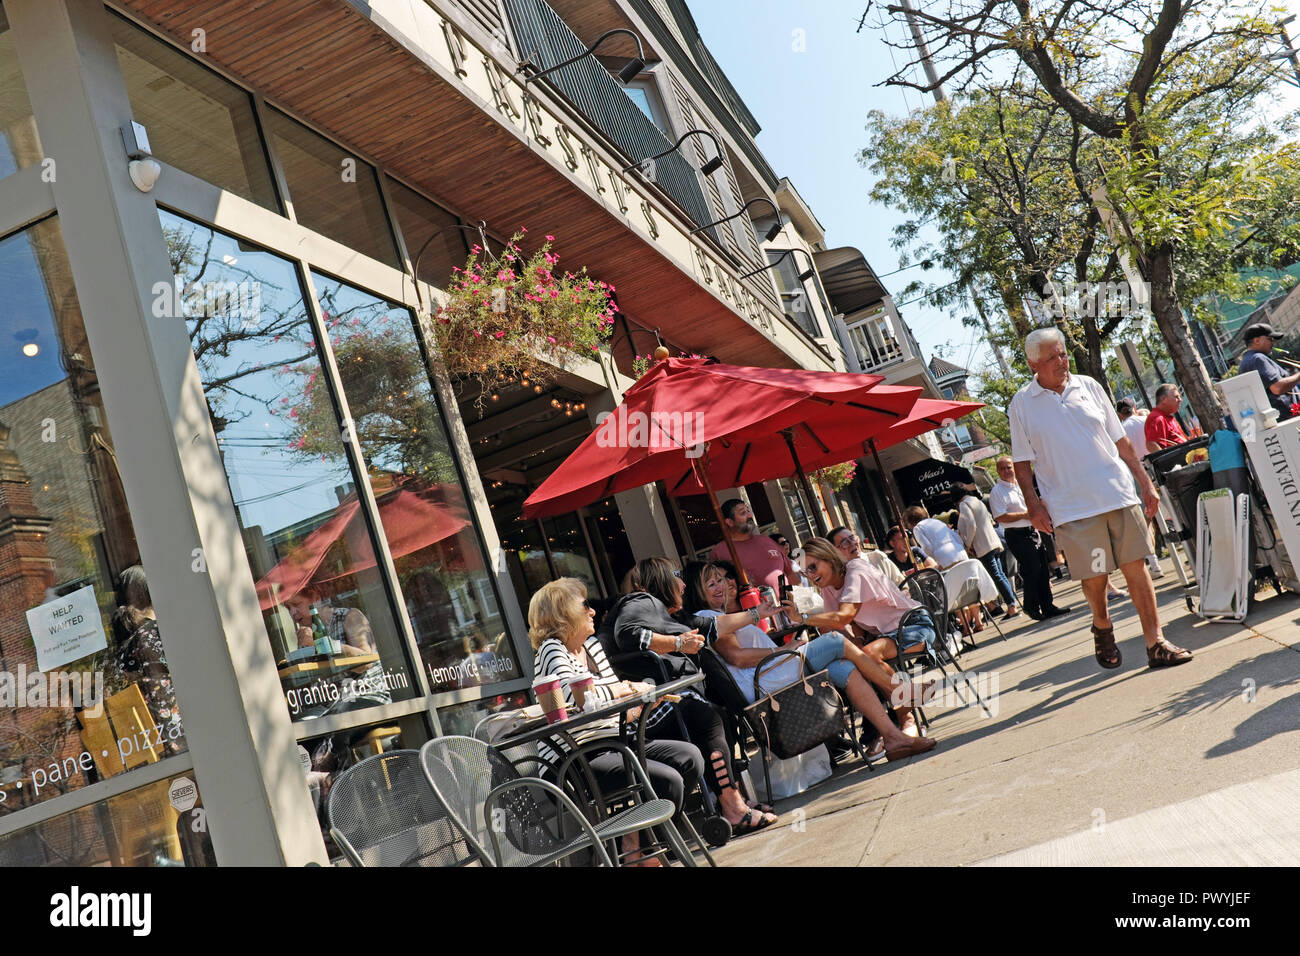 Cleveland residents enjoy the warm October weather at outdoor tables in front of Prestis in the Little Italy neighborhood of Cleveland, Ohio, USA. Stock Photo